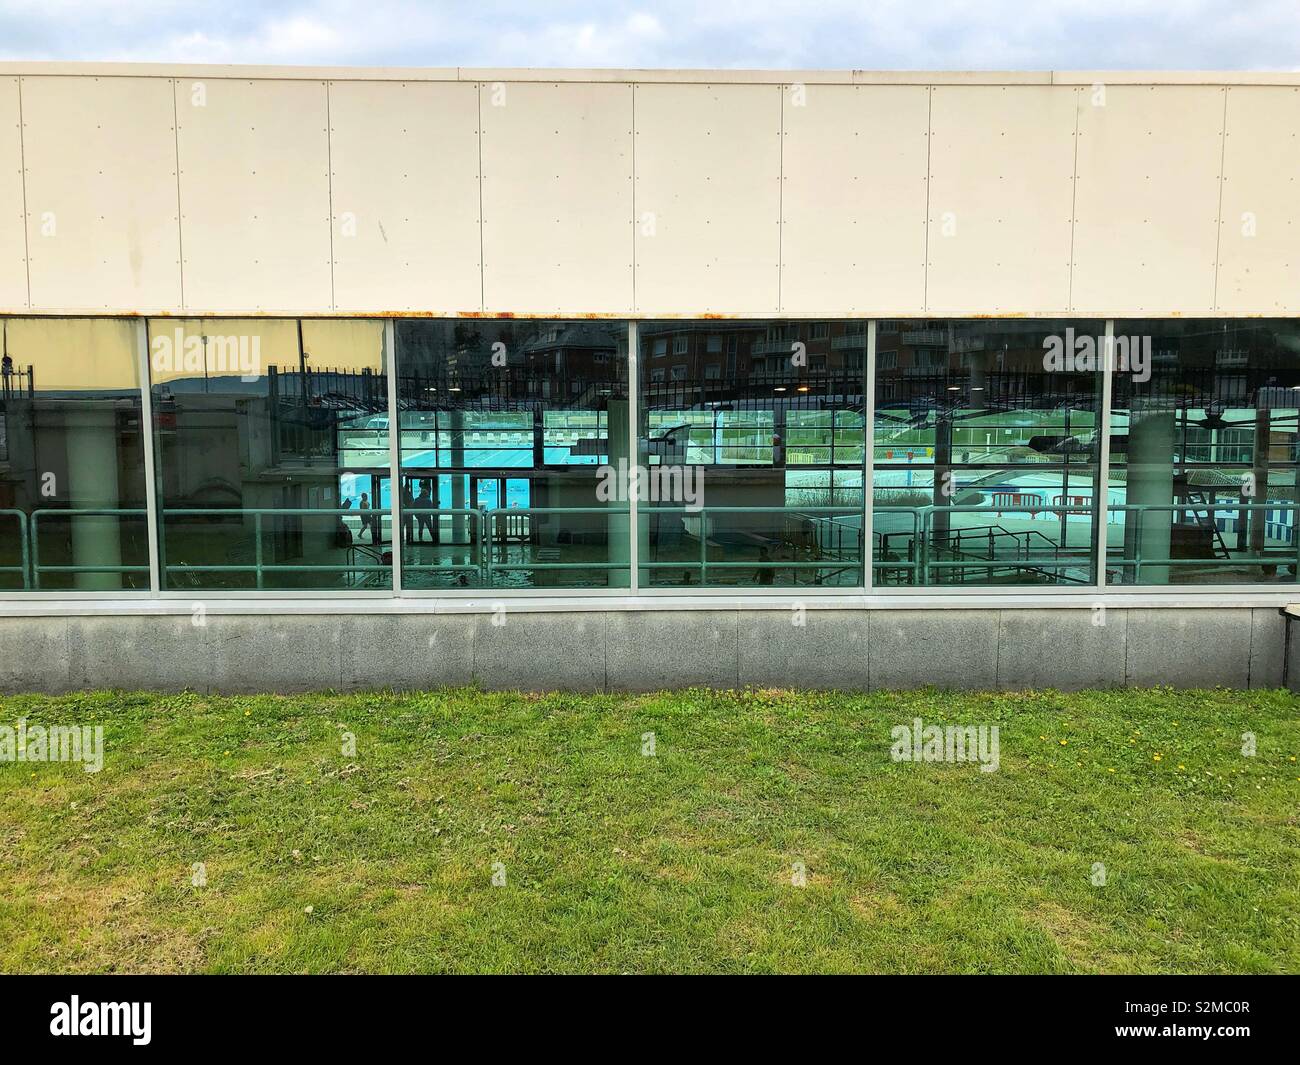 A section of the Dieppe aquatic centre and spa with the swimming pool visible through the windows. Stock Photo